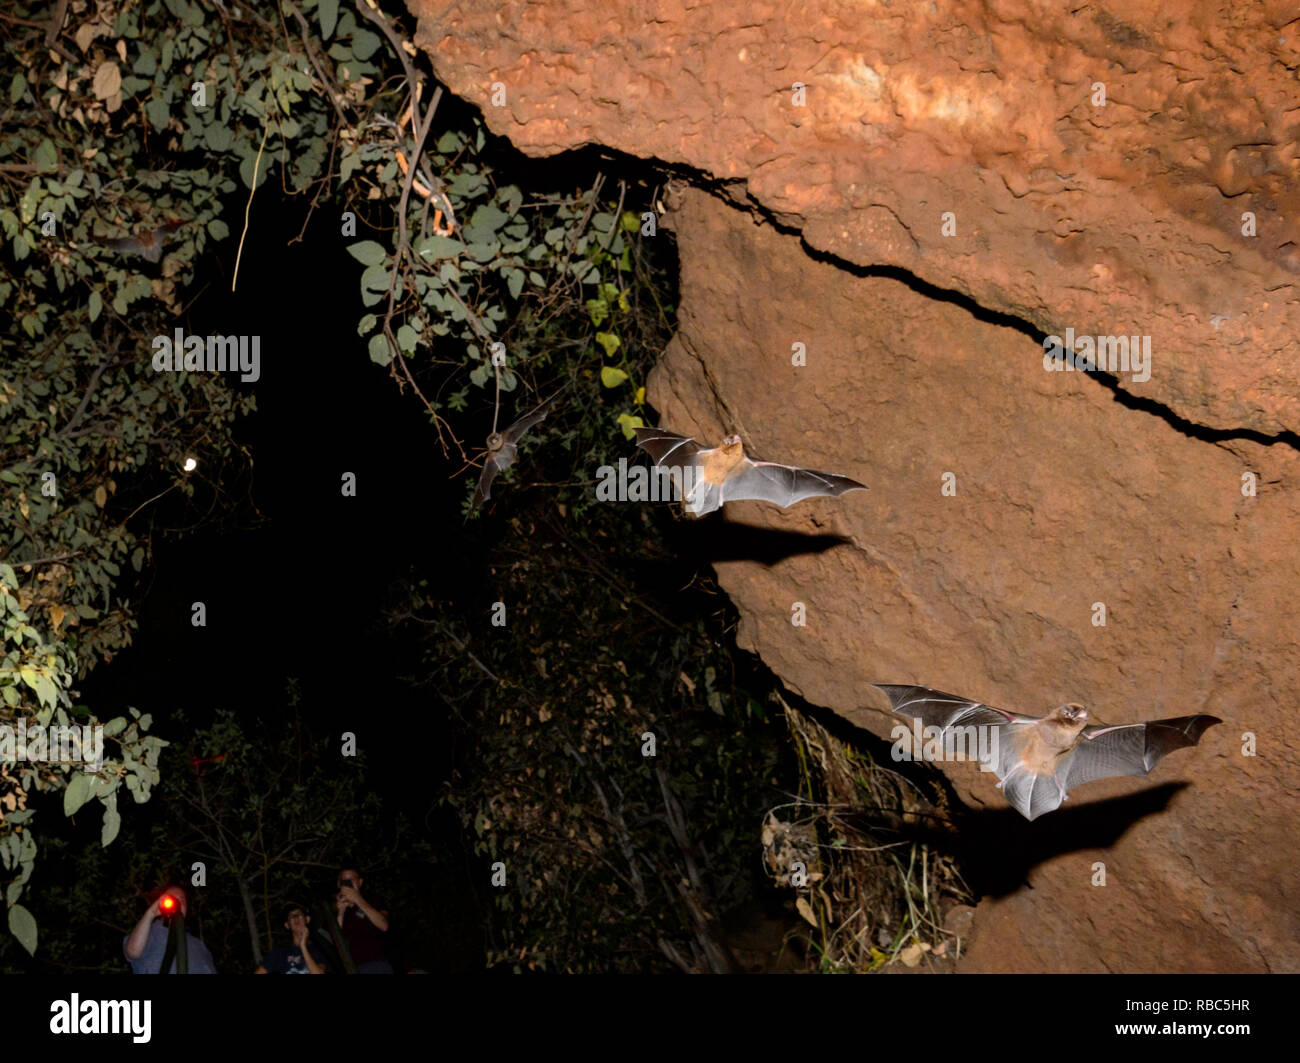 Tourists observing Eastern Horseshoe Bats or Micro Bats (Rhinolophus megaphyllus ignifer) coming out of Archway Cave to hunt at night, Undara Lava Tub Stock Photo